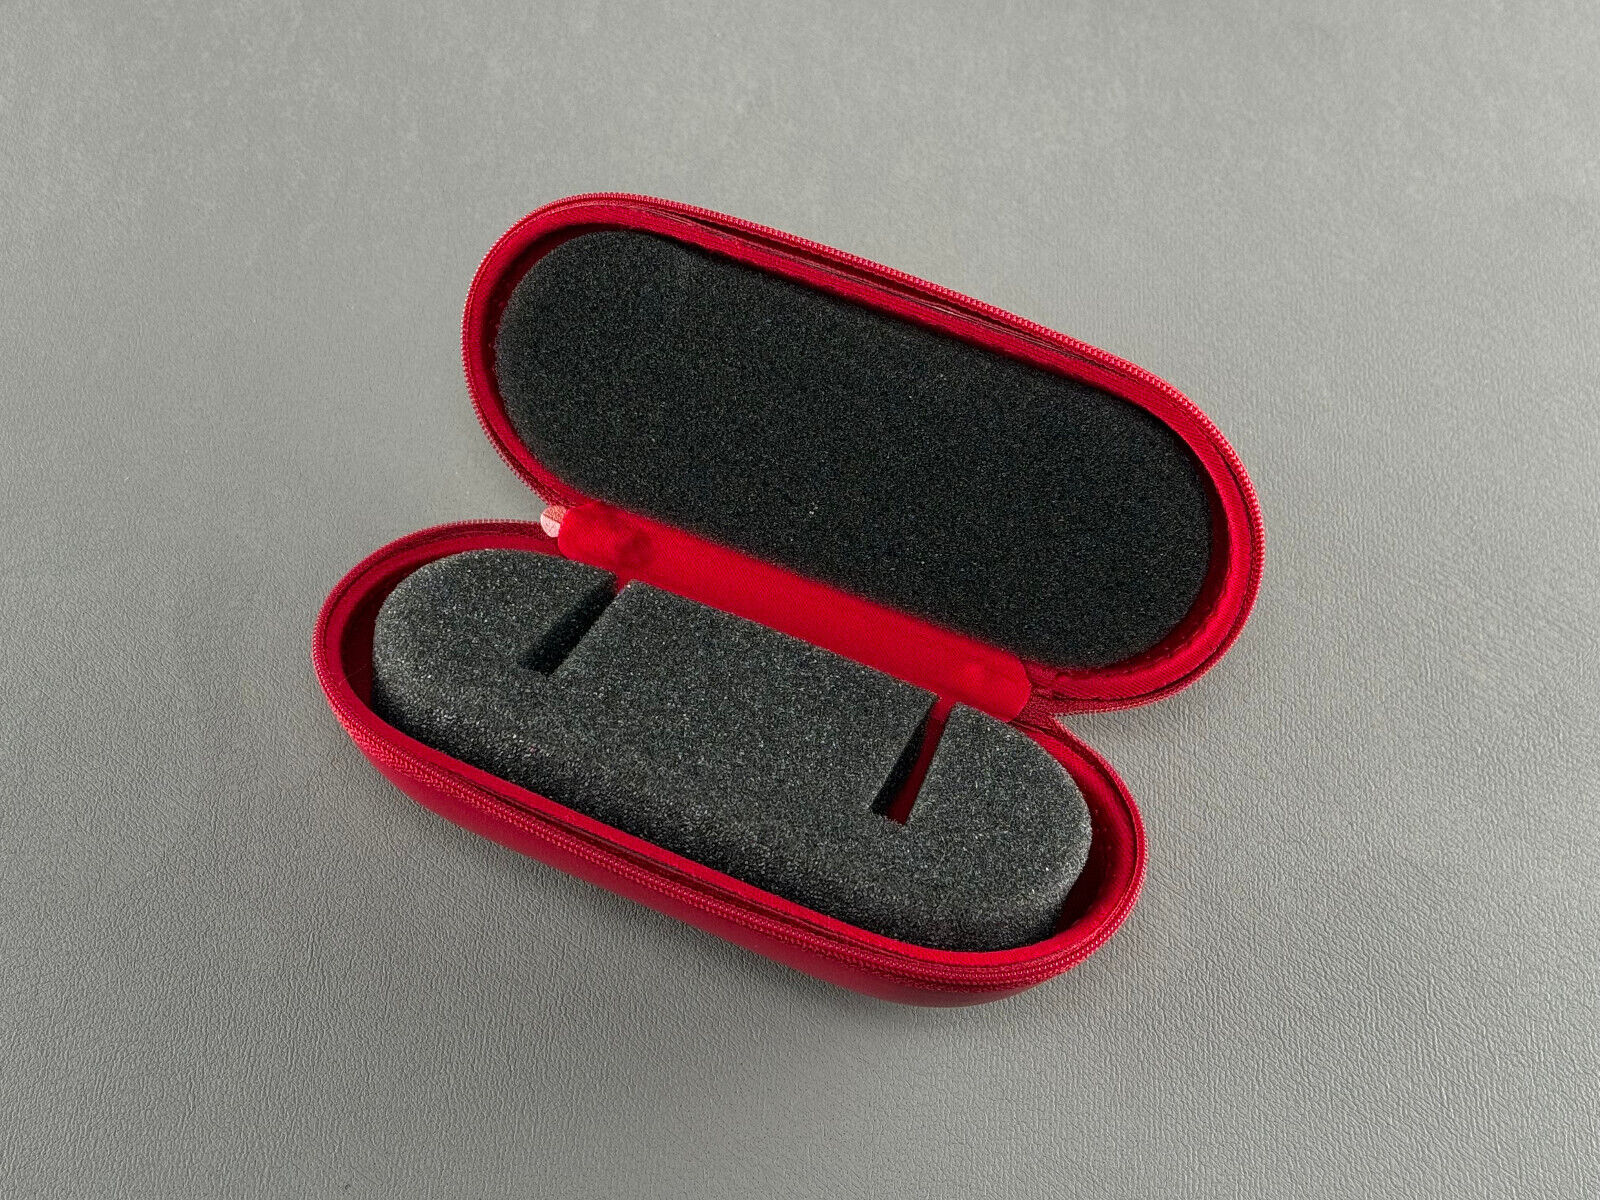 Omega watch case red